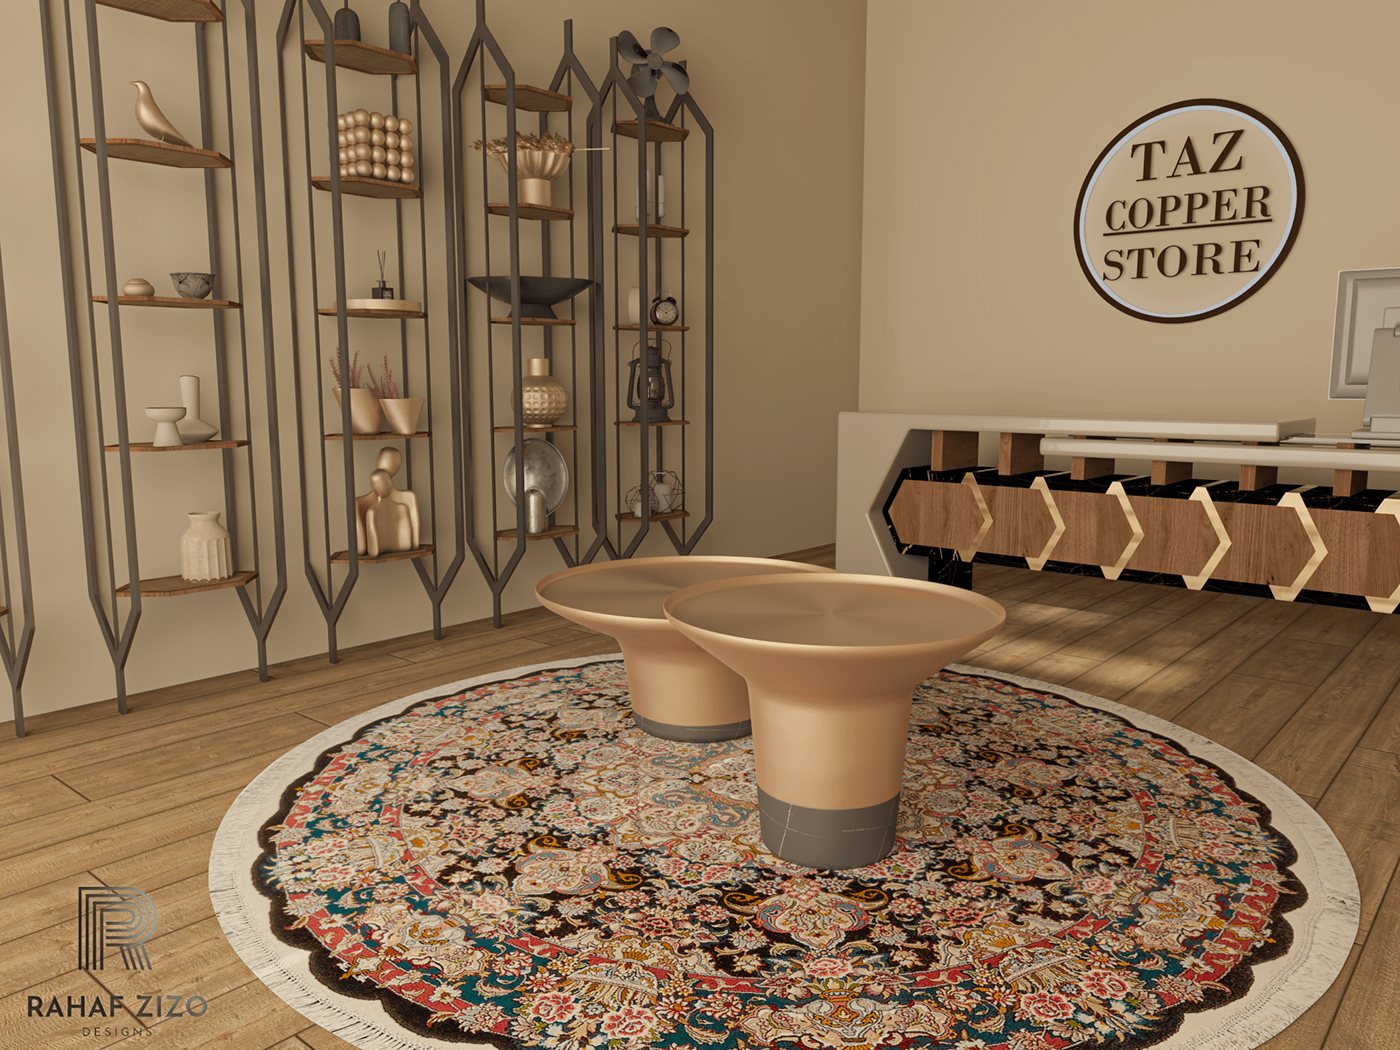 indoor copper architecture 3D Render 3ds max vray visualization counter